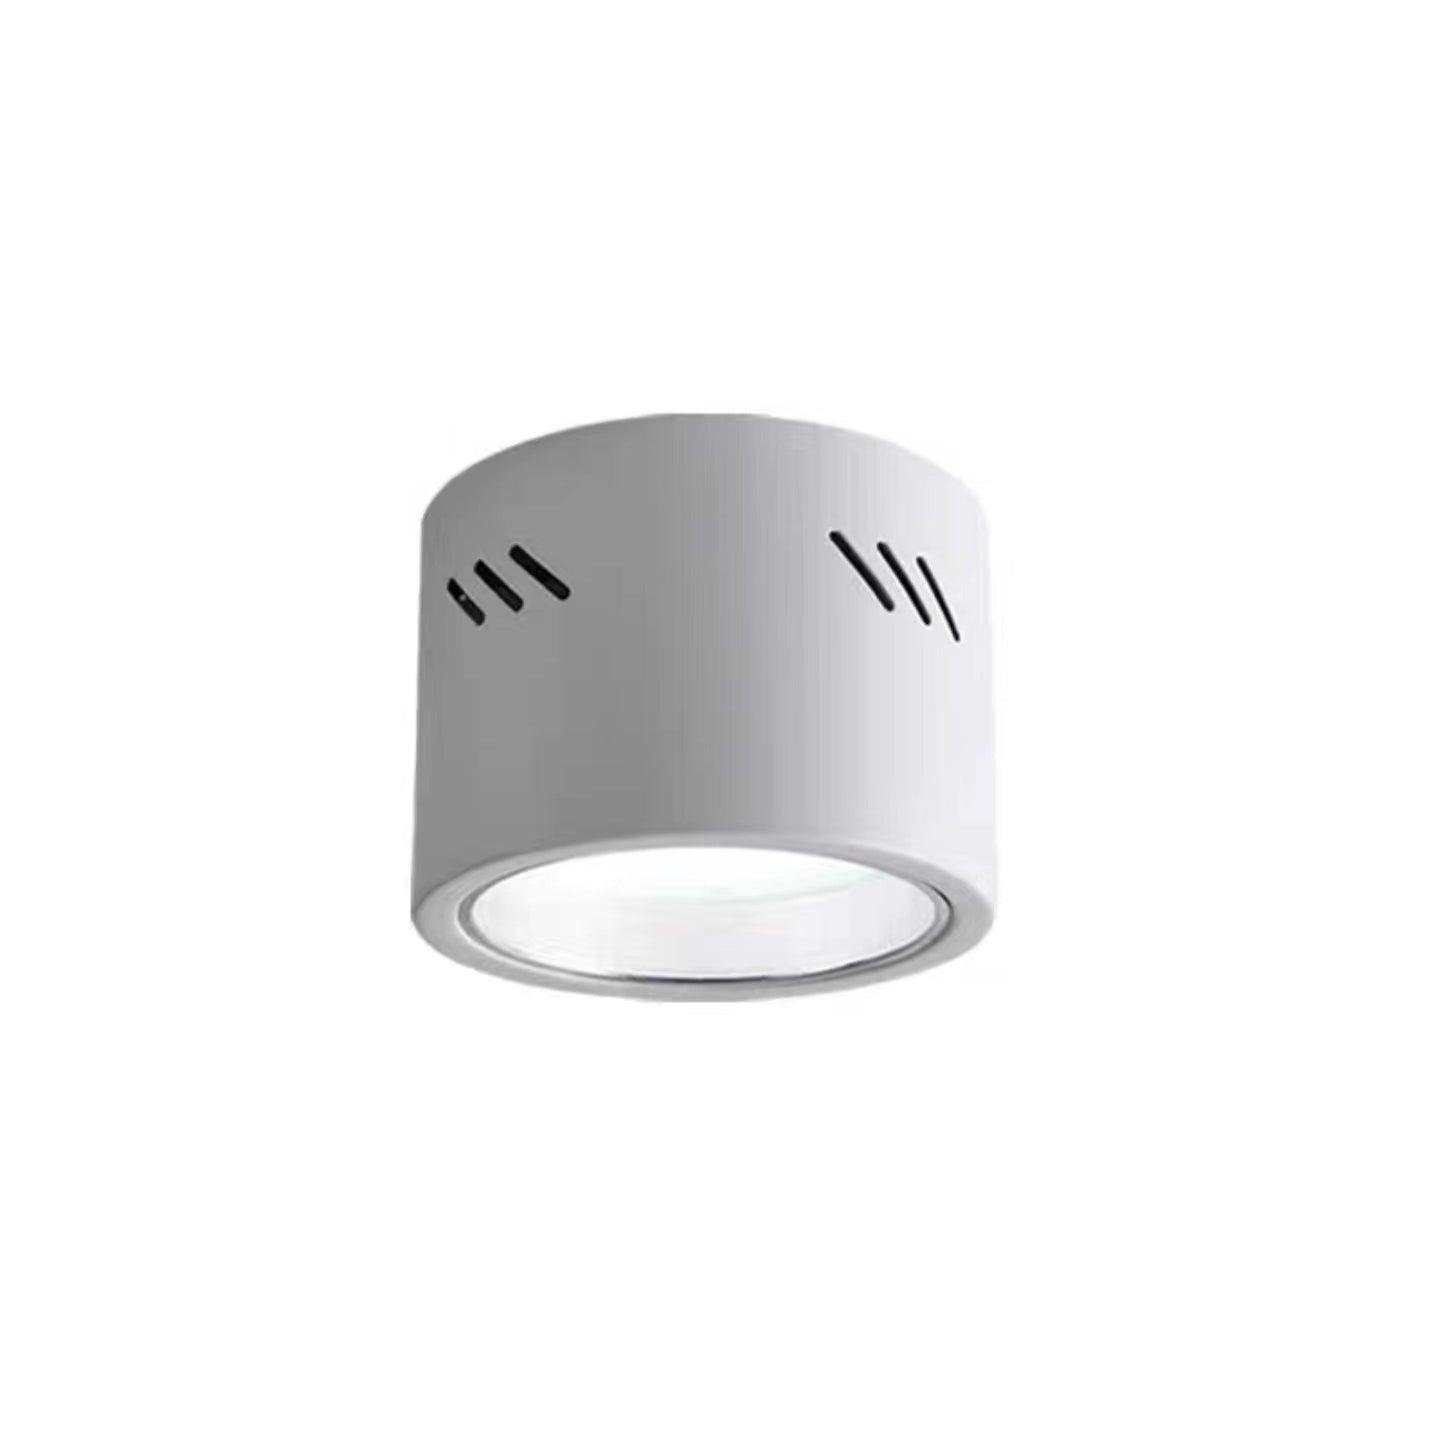 Aven Spotlight Set, 10 count, Cool White Light, Diameter 5.2 inches x Height 4.7 inches